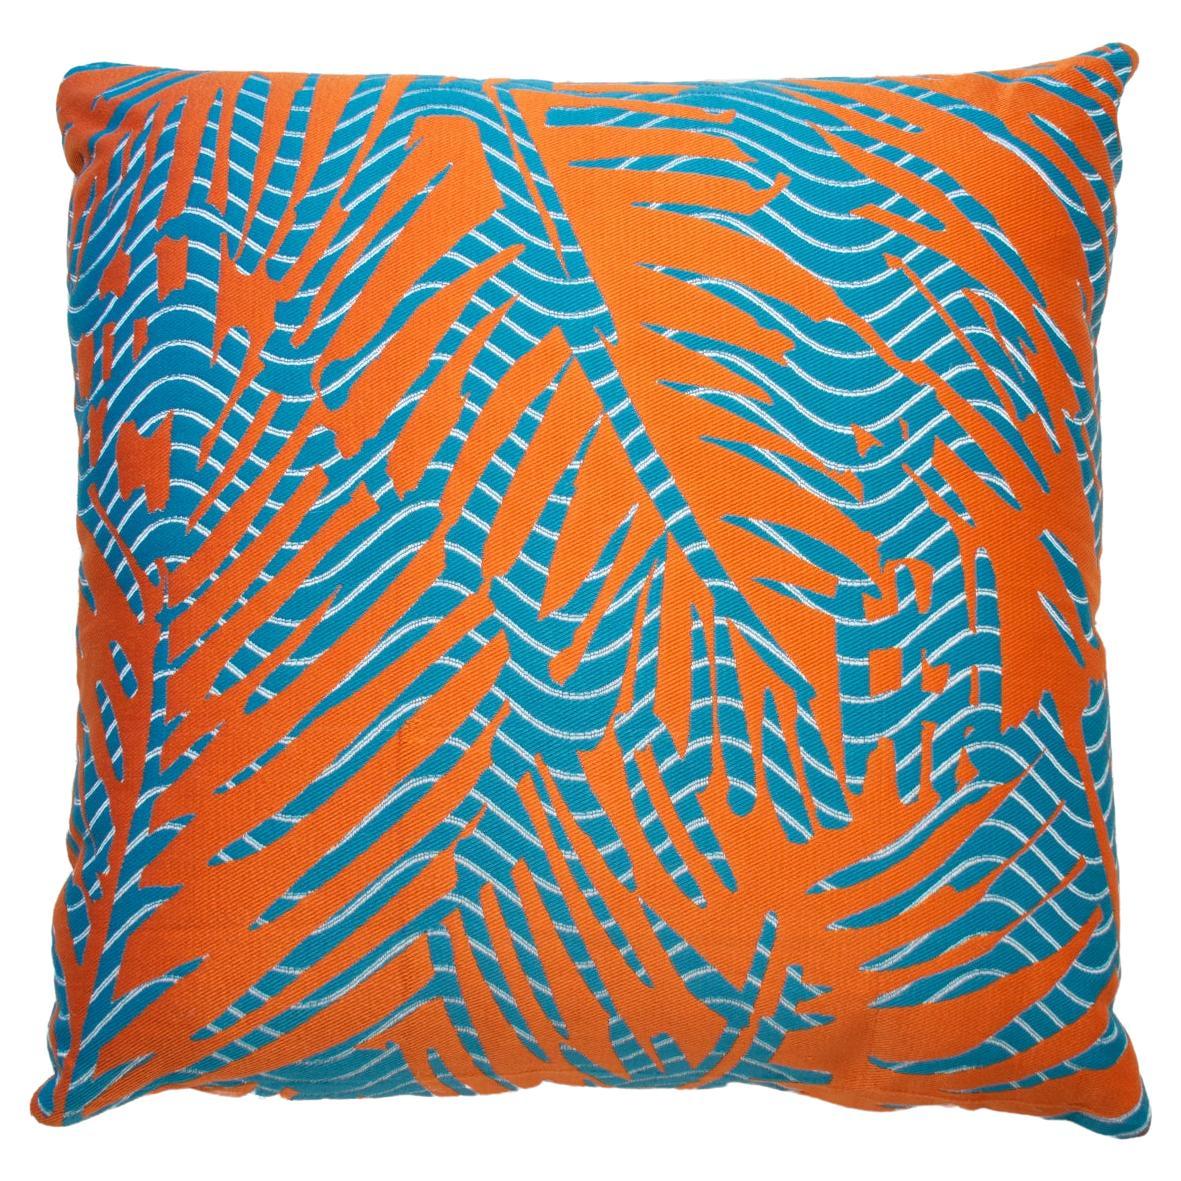 Introducing the exquisite limited edition Hermes Fabric Feuillage Vague, a truly exceptional piece that encapsulates the essence of luxury, craftsmanship, and timeless beauty. Meticulously crafted using discontinued Hermes fabrics, these pillows are